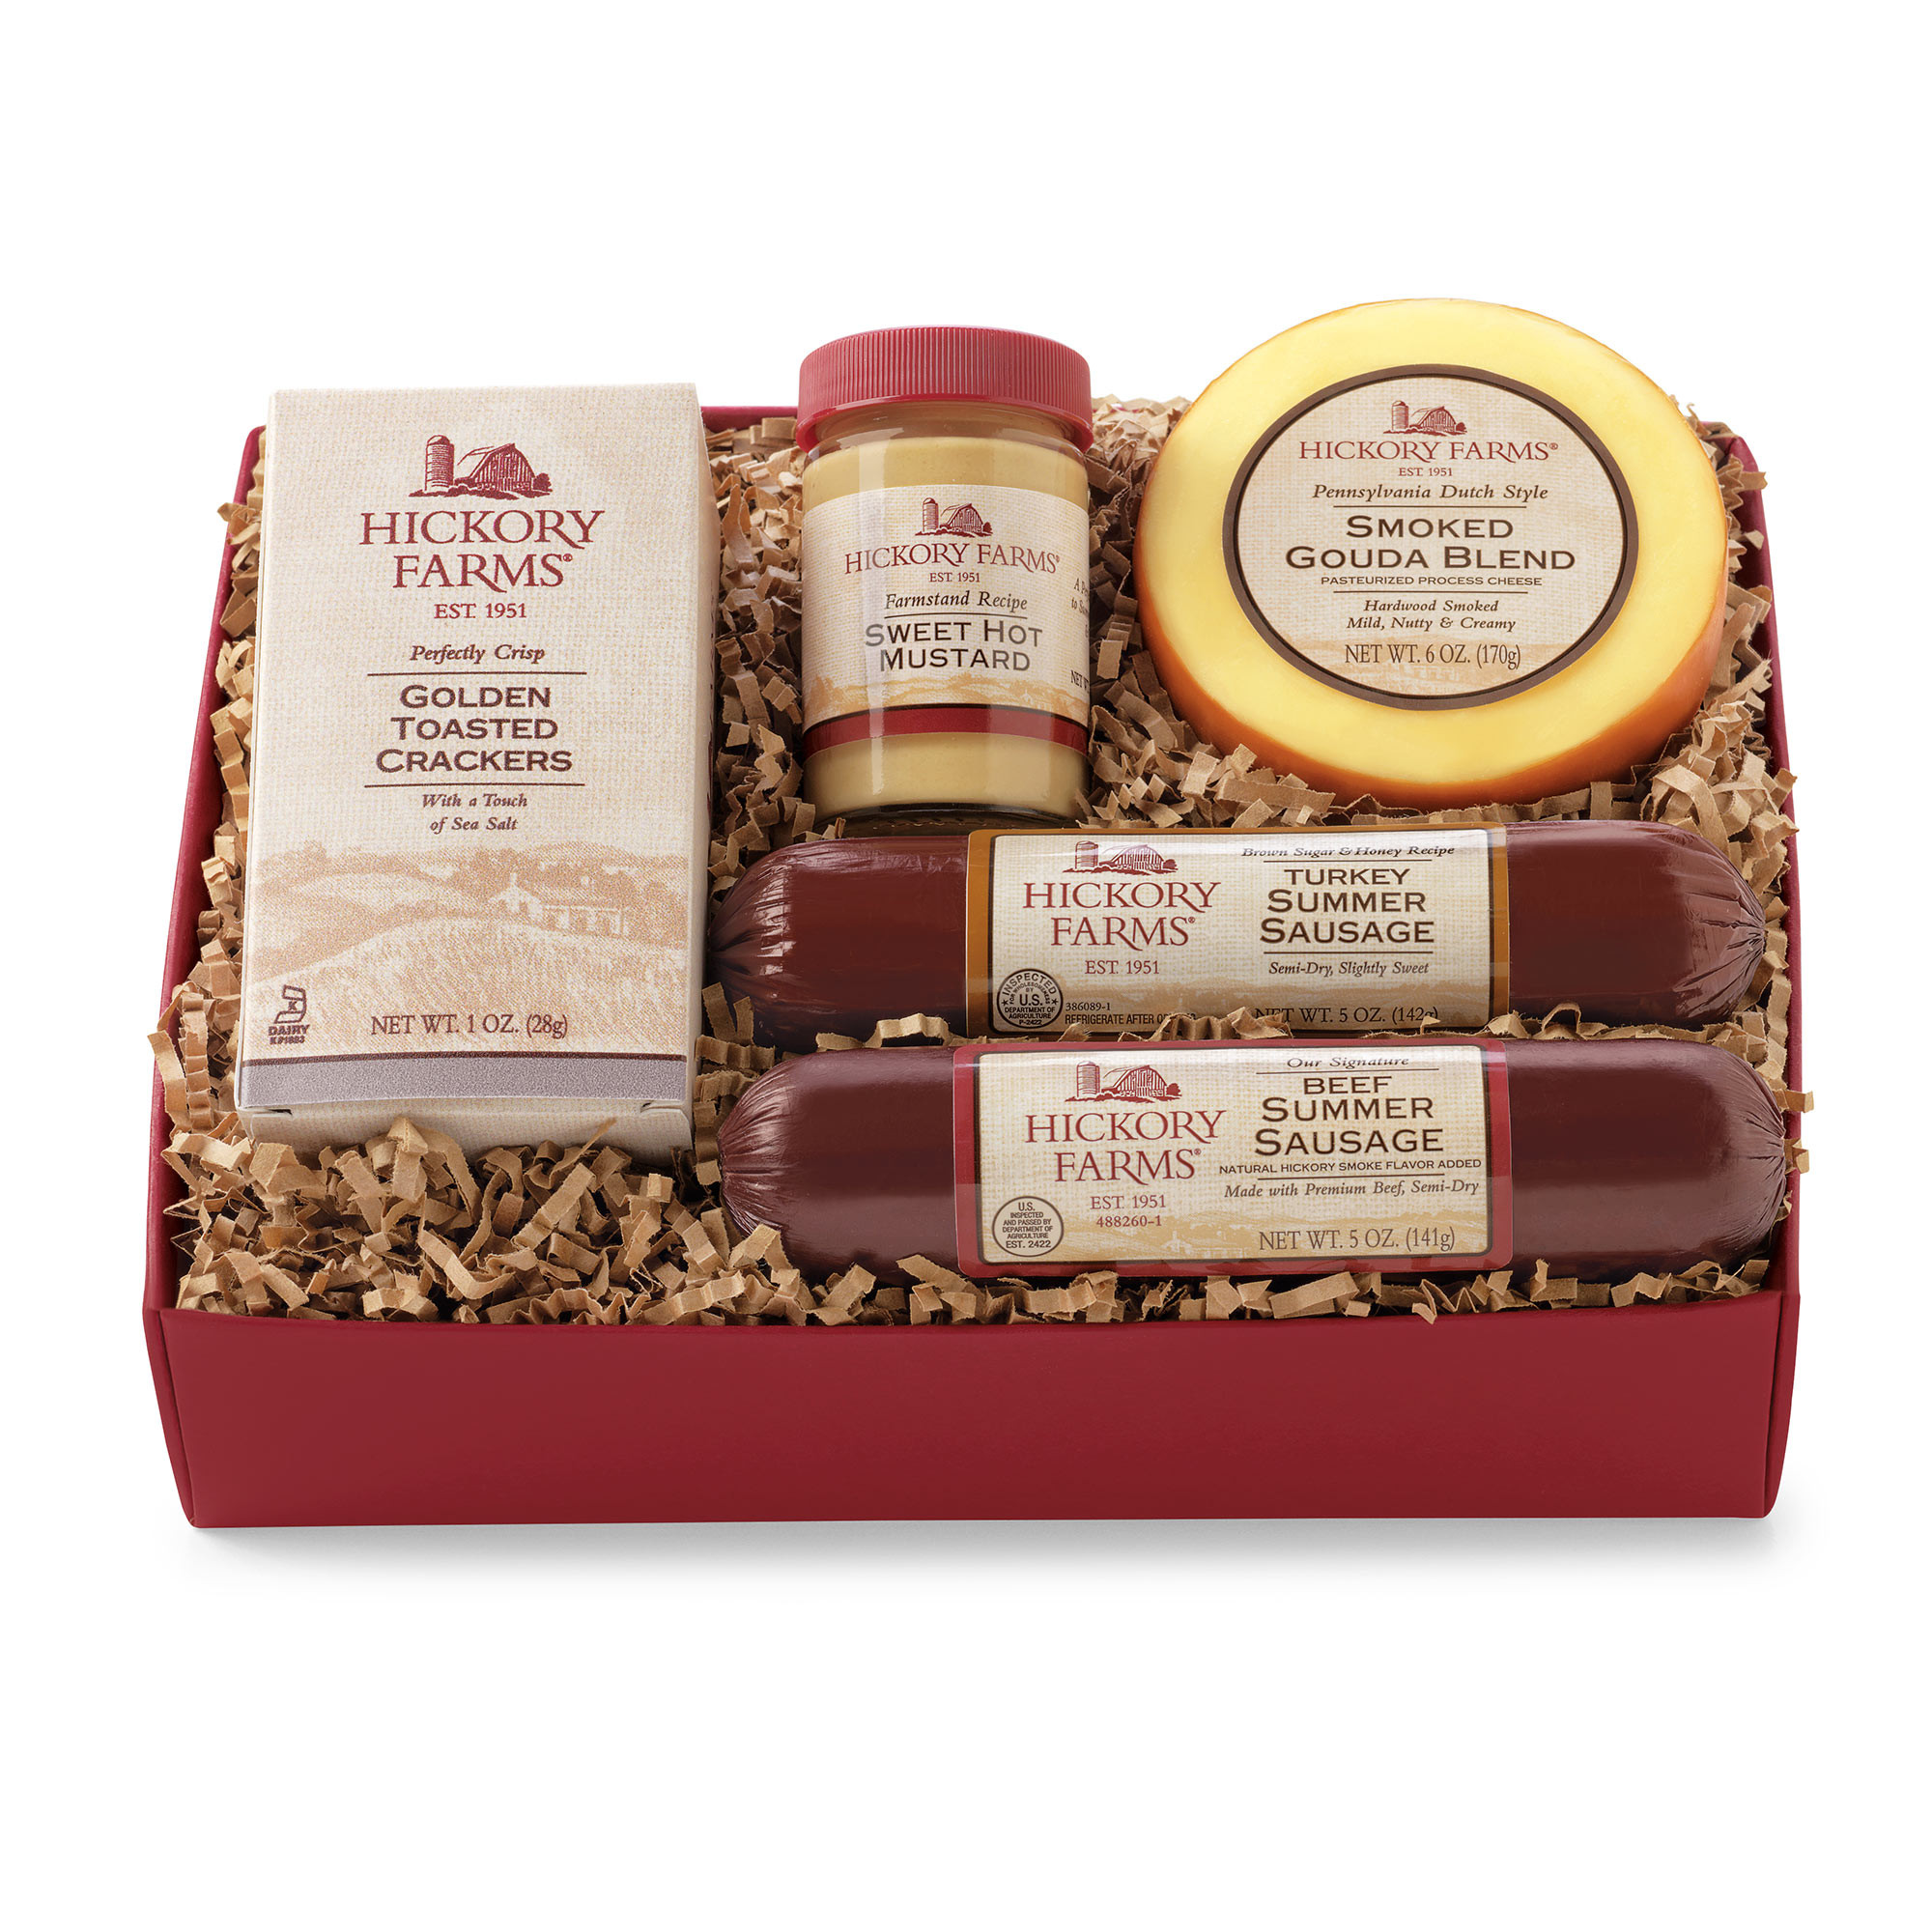 Hickory Farms Beef Summer Sausage
 Beef & Turkey Hickory Sampler